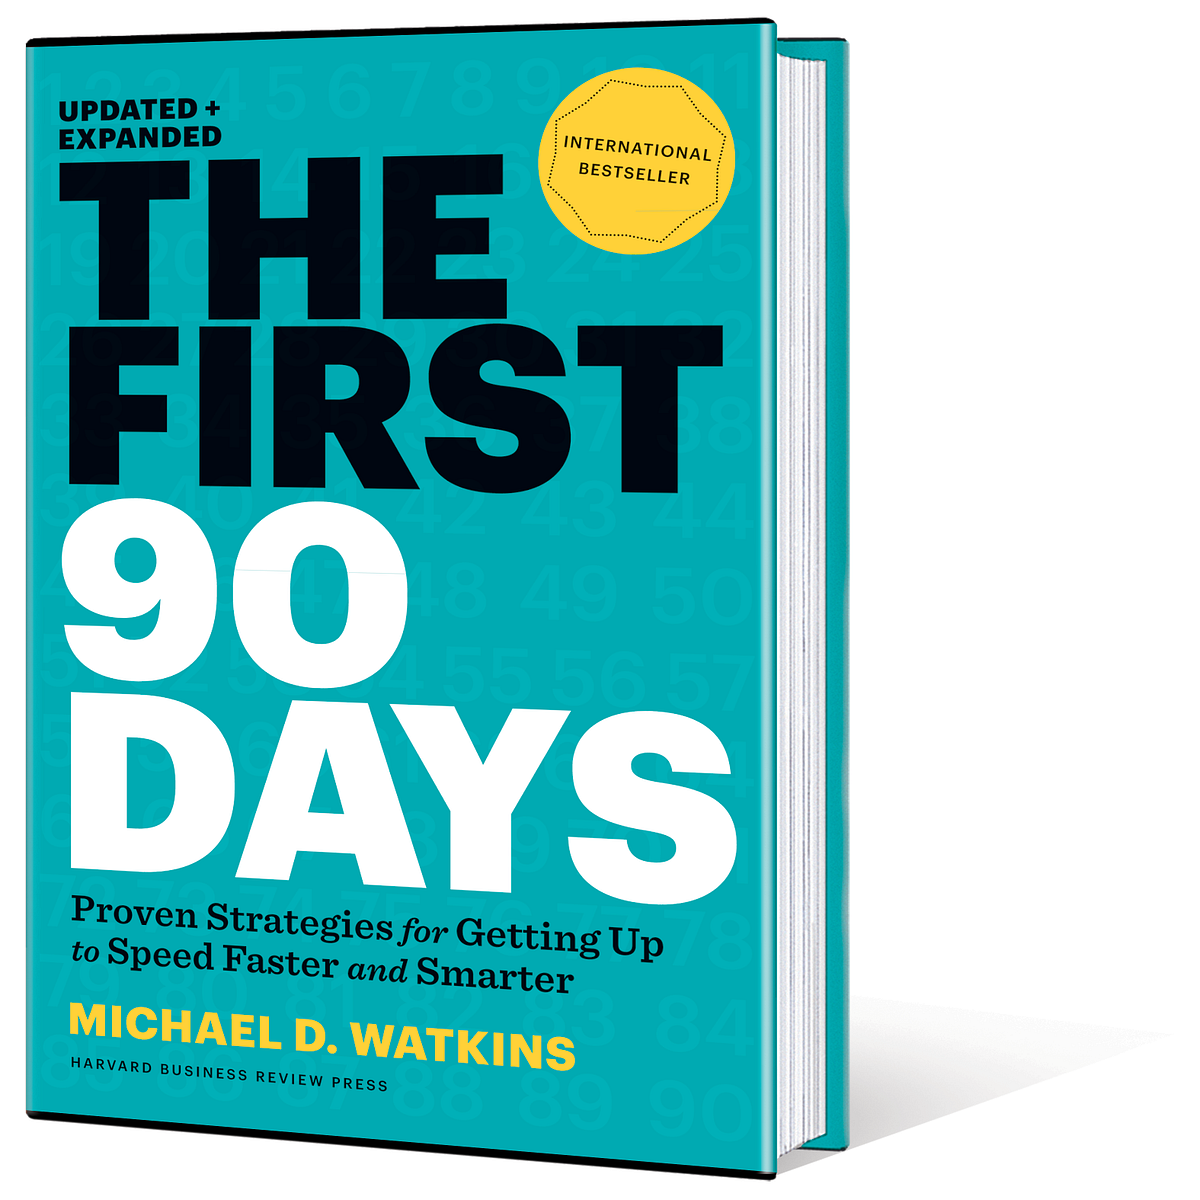 The Power of Culture and Human Connection - My First 90 Days at